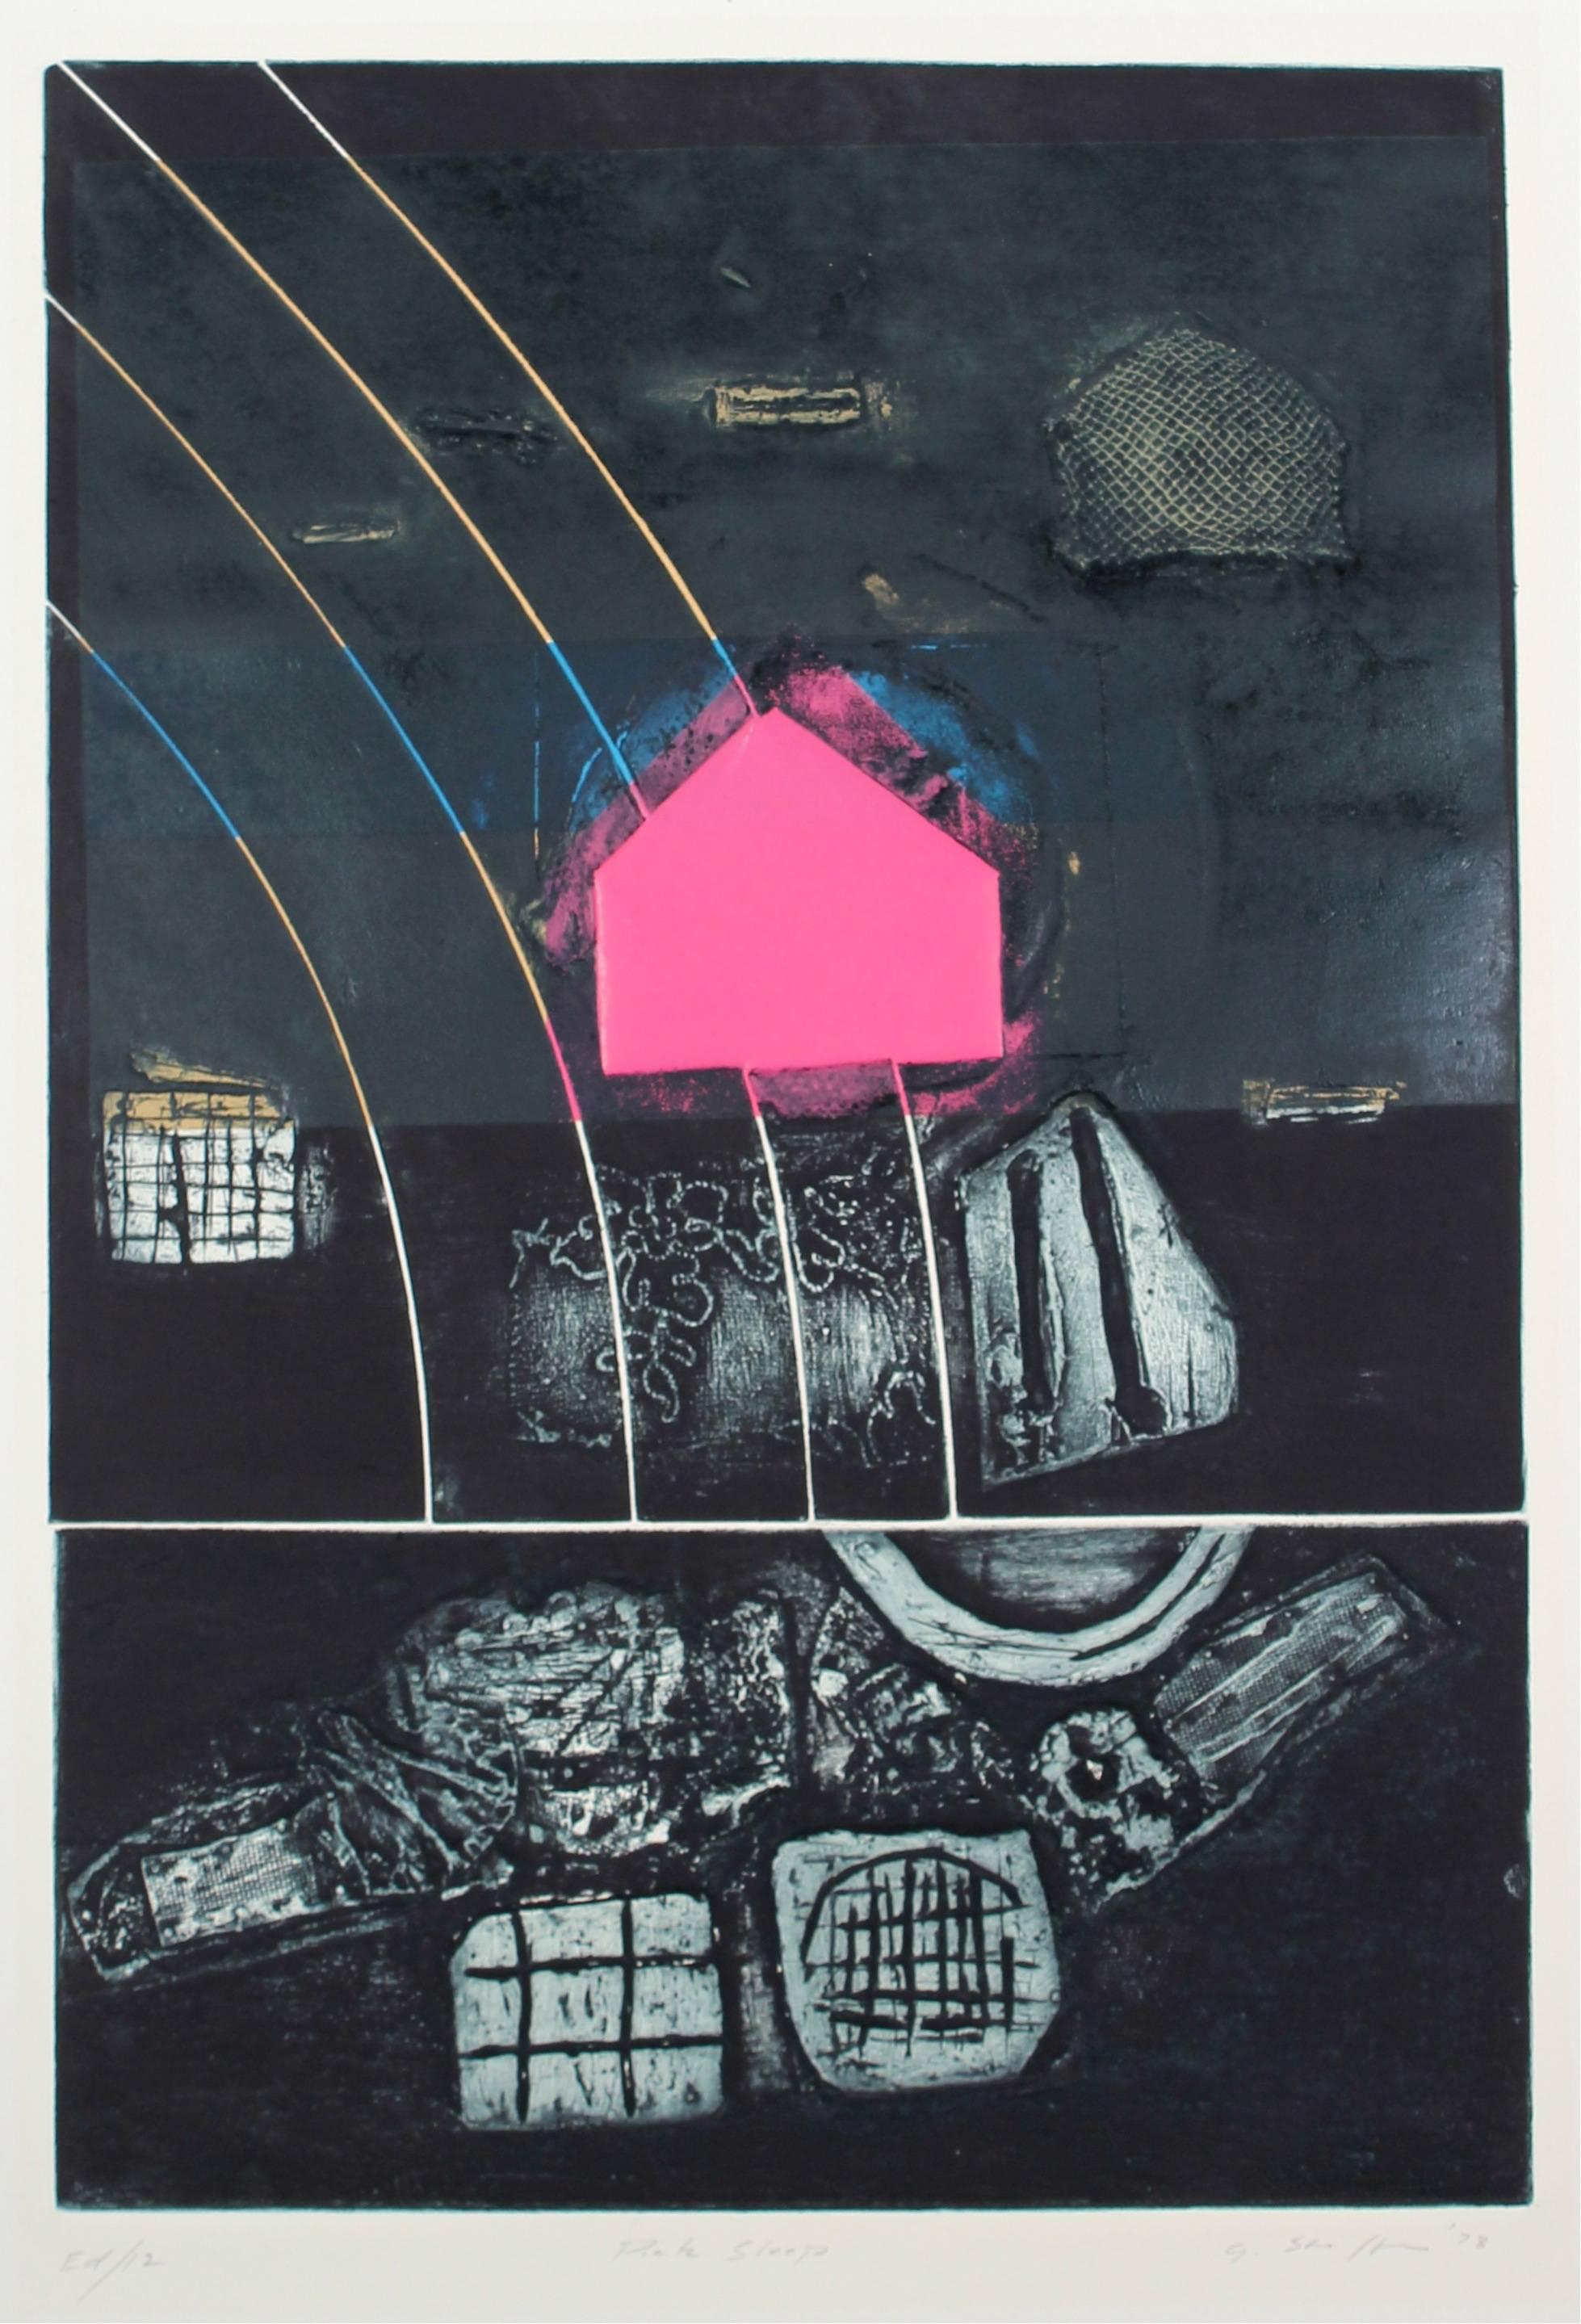 Gary Lee Shaffer Abstract Print - "Pink Step" Abstract Expressionist Collograph Print, 1973